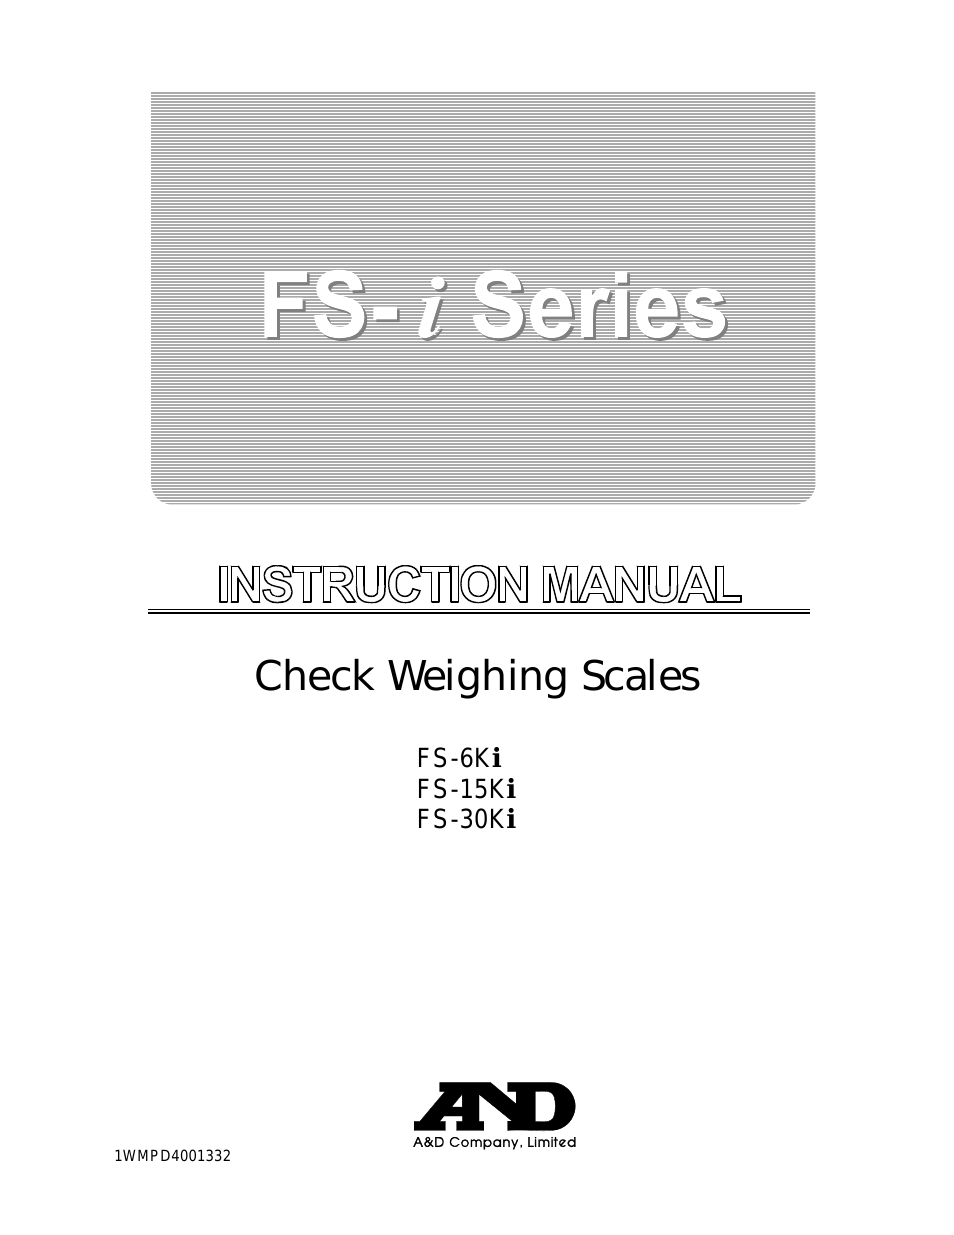 Check Weighing Scales FS-6Ki (Page 1)